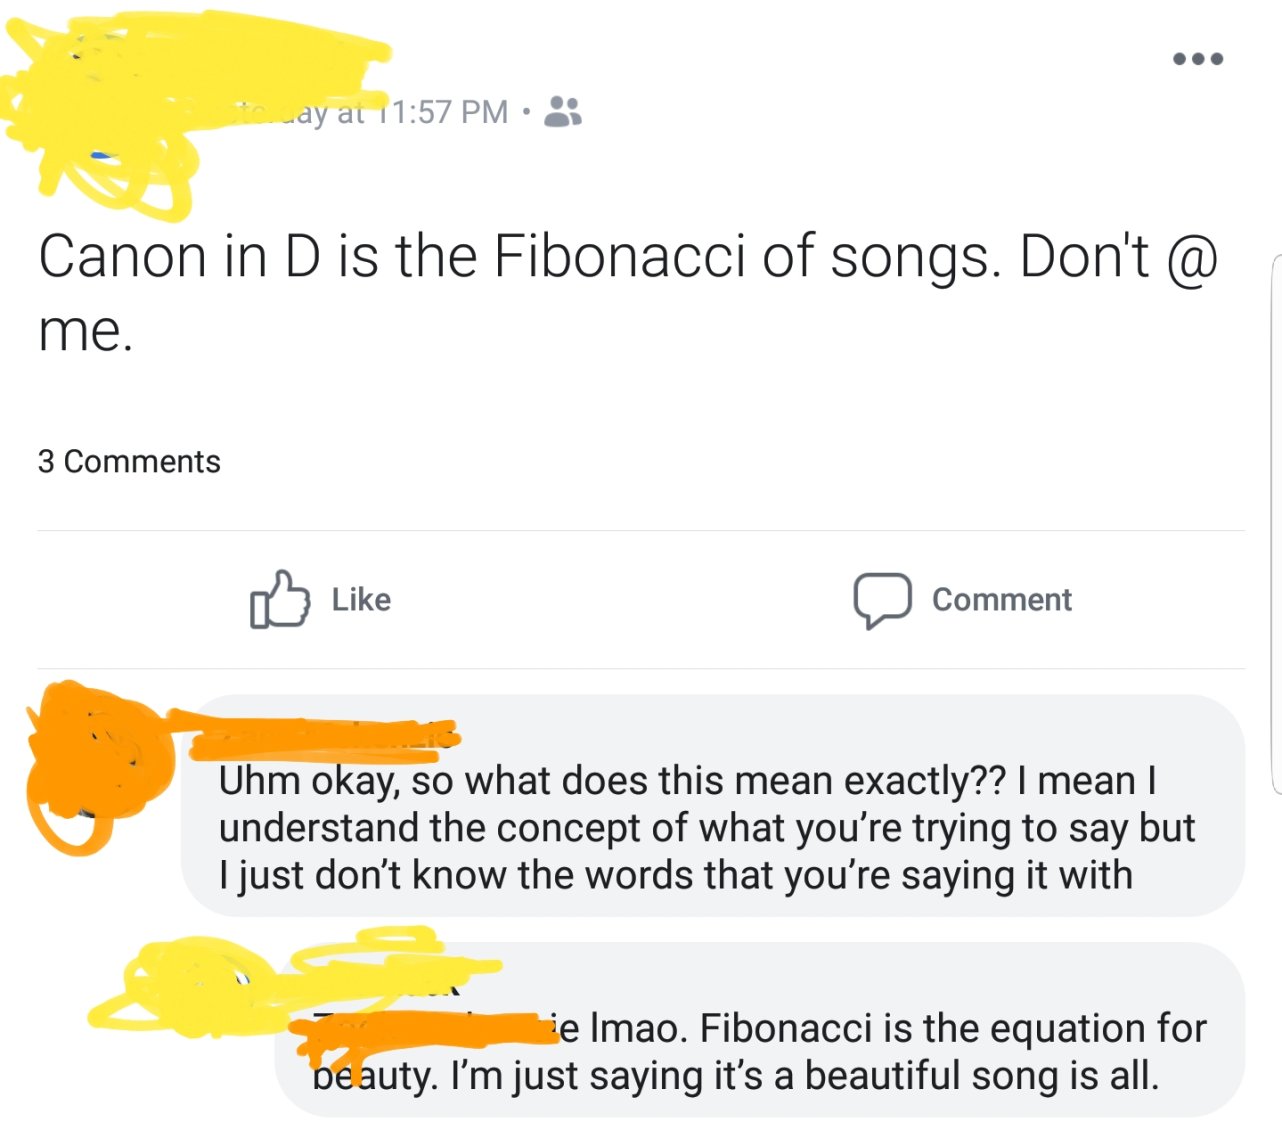 material - way at Canon in D is the Fibonacci of songs. Don't @ me. 3 0 Comment Uhm okay, so what does this mean exactly?? I mean understand the concept of what you're trying to say but I just don't know the words that you're saying it with je imao. Fibon